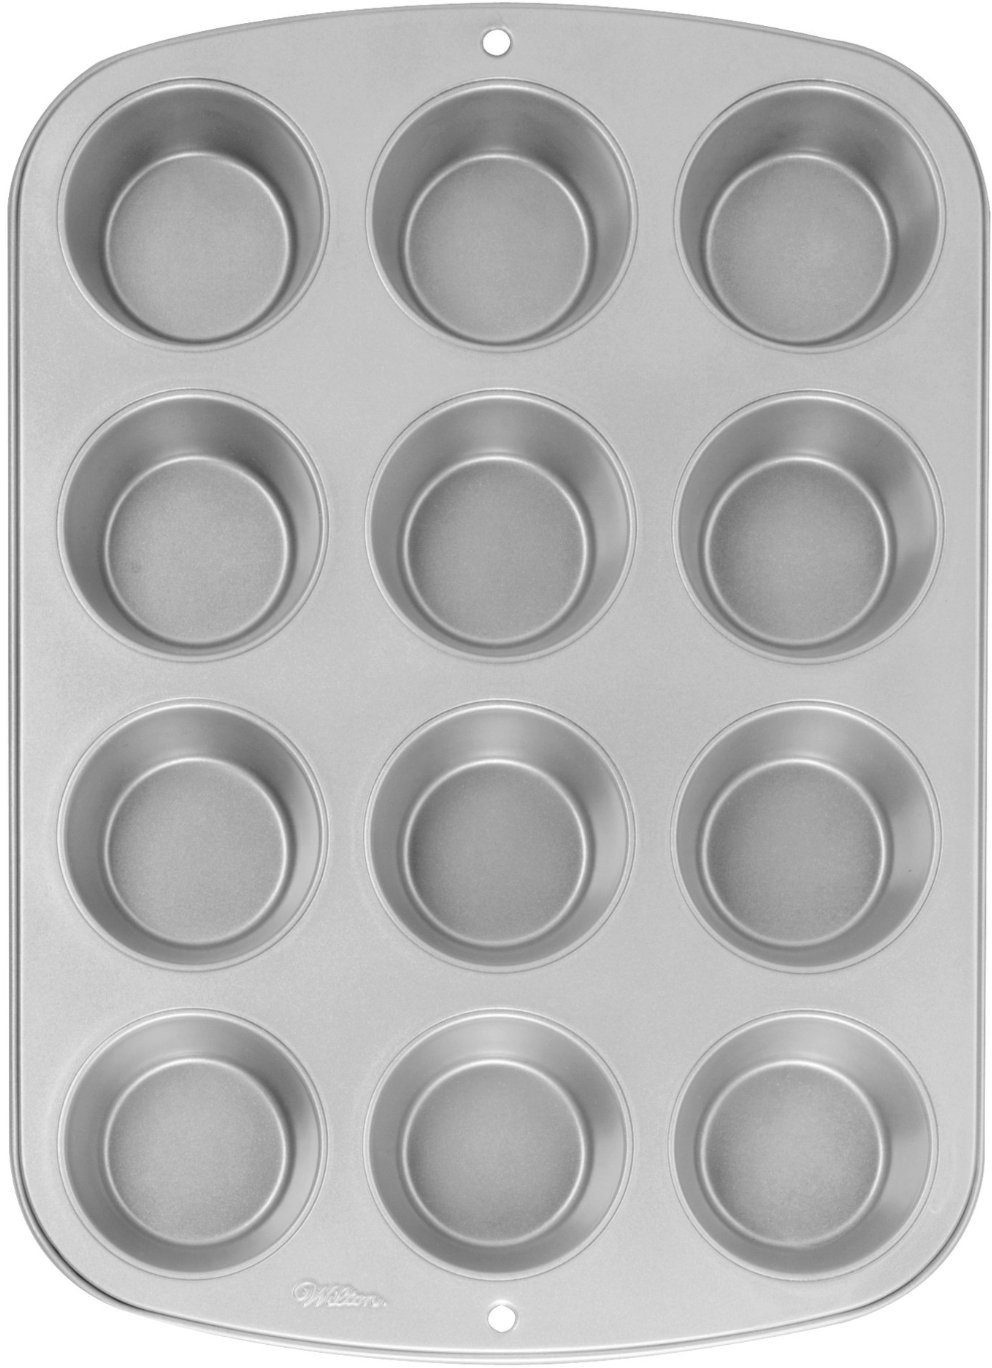 Review of Wilton Recipe Right Nonstick 12-Cup Regular Muffin Pan